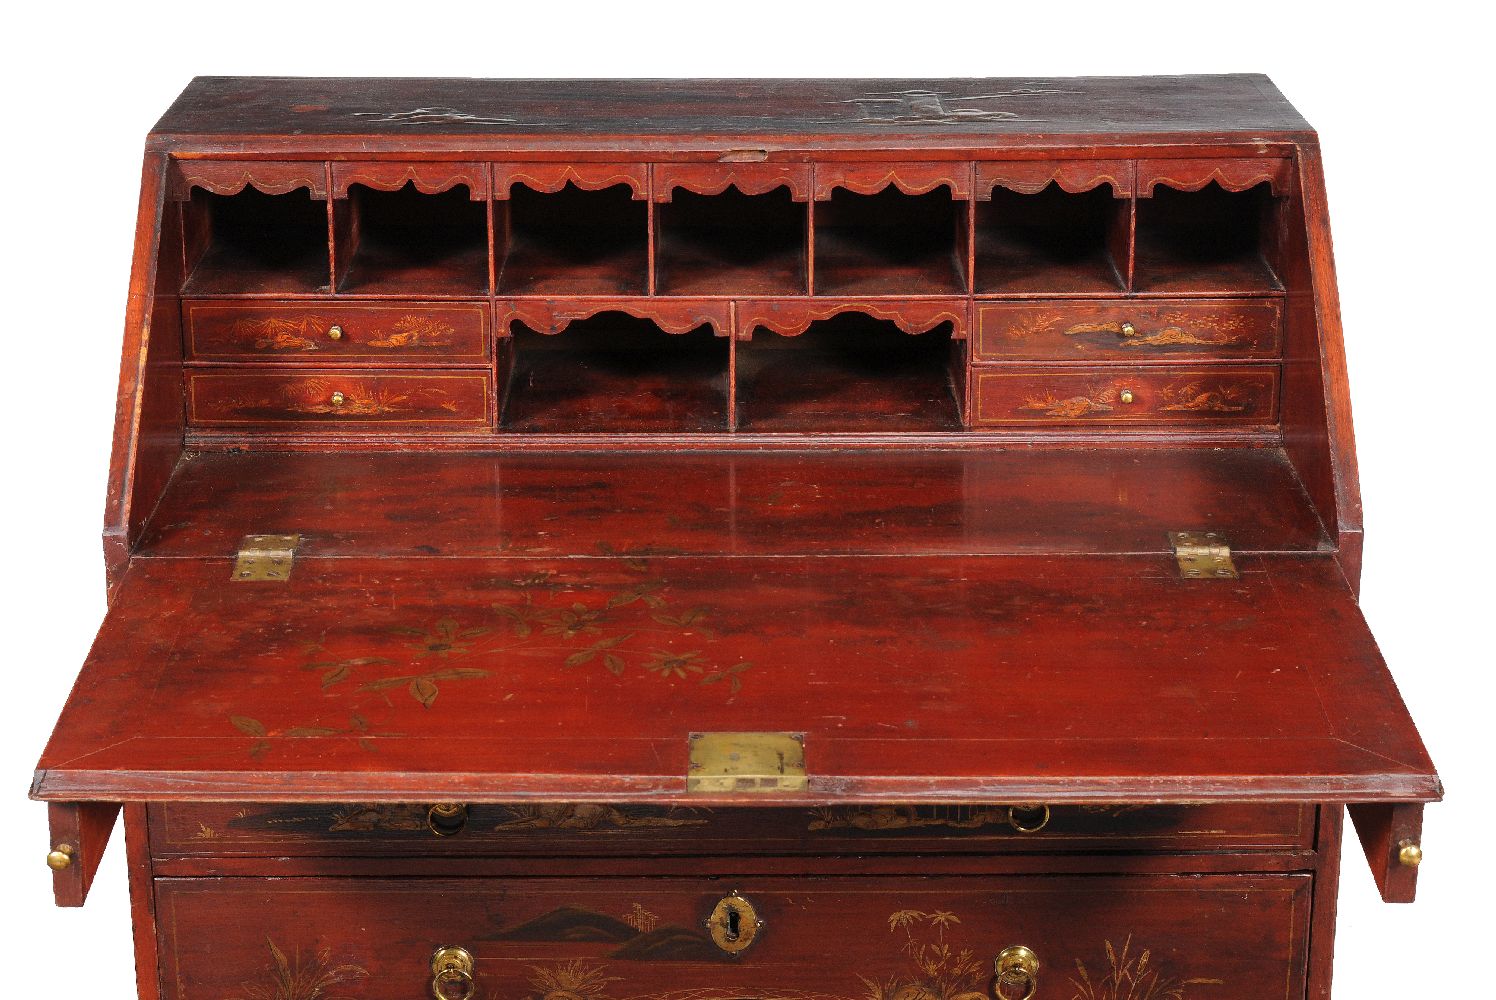 A George II red lacquer and gilt Chinoiserie decorated bureau, circa 1740 the decoration depicting - Image 2 of 5